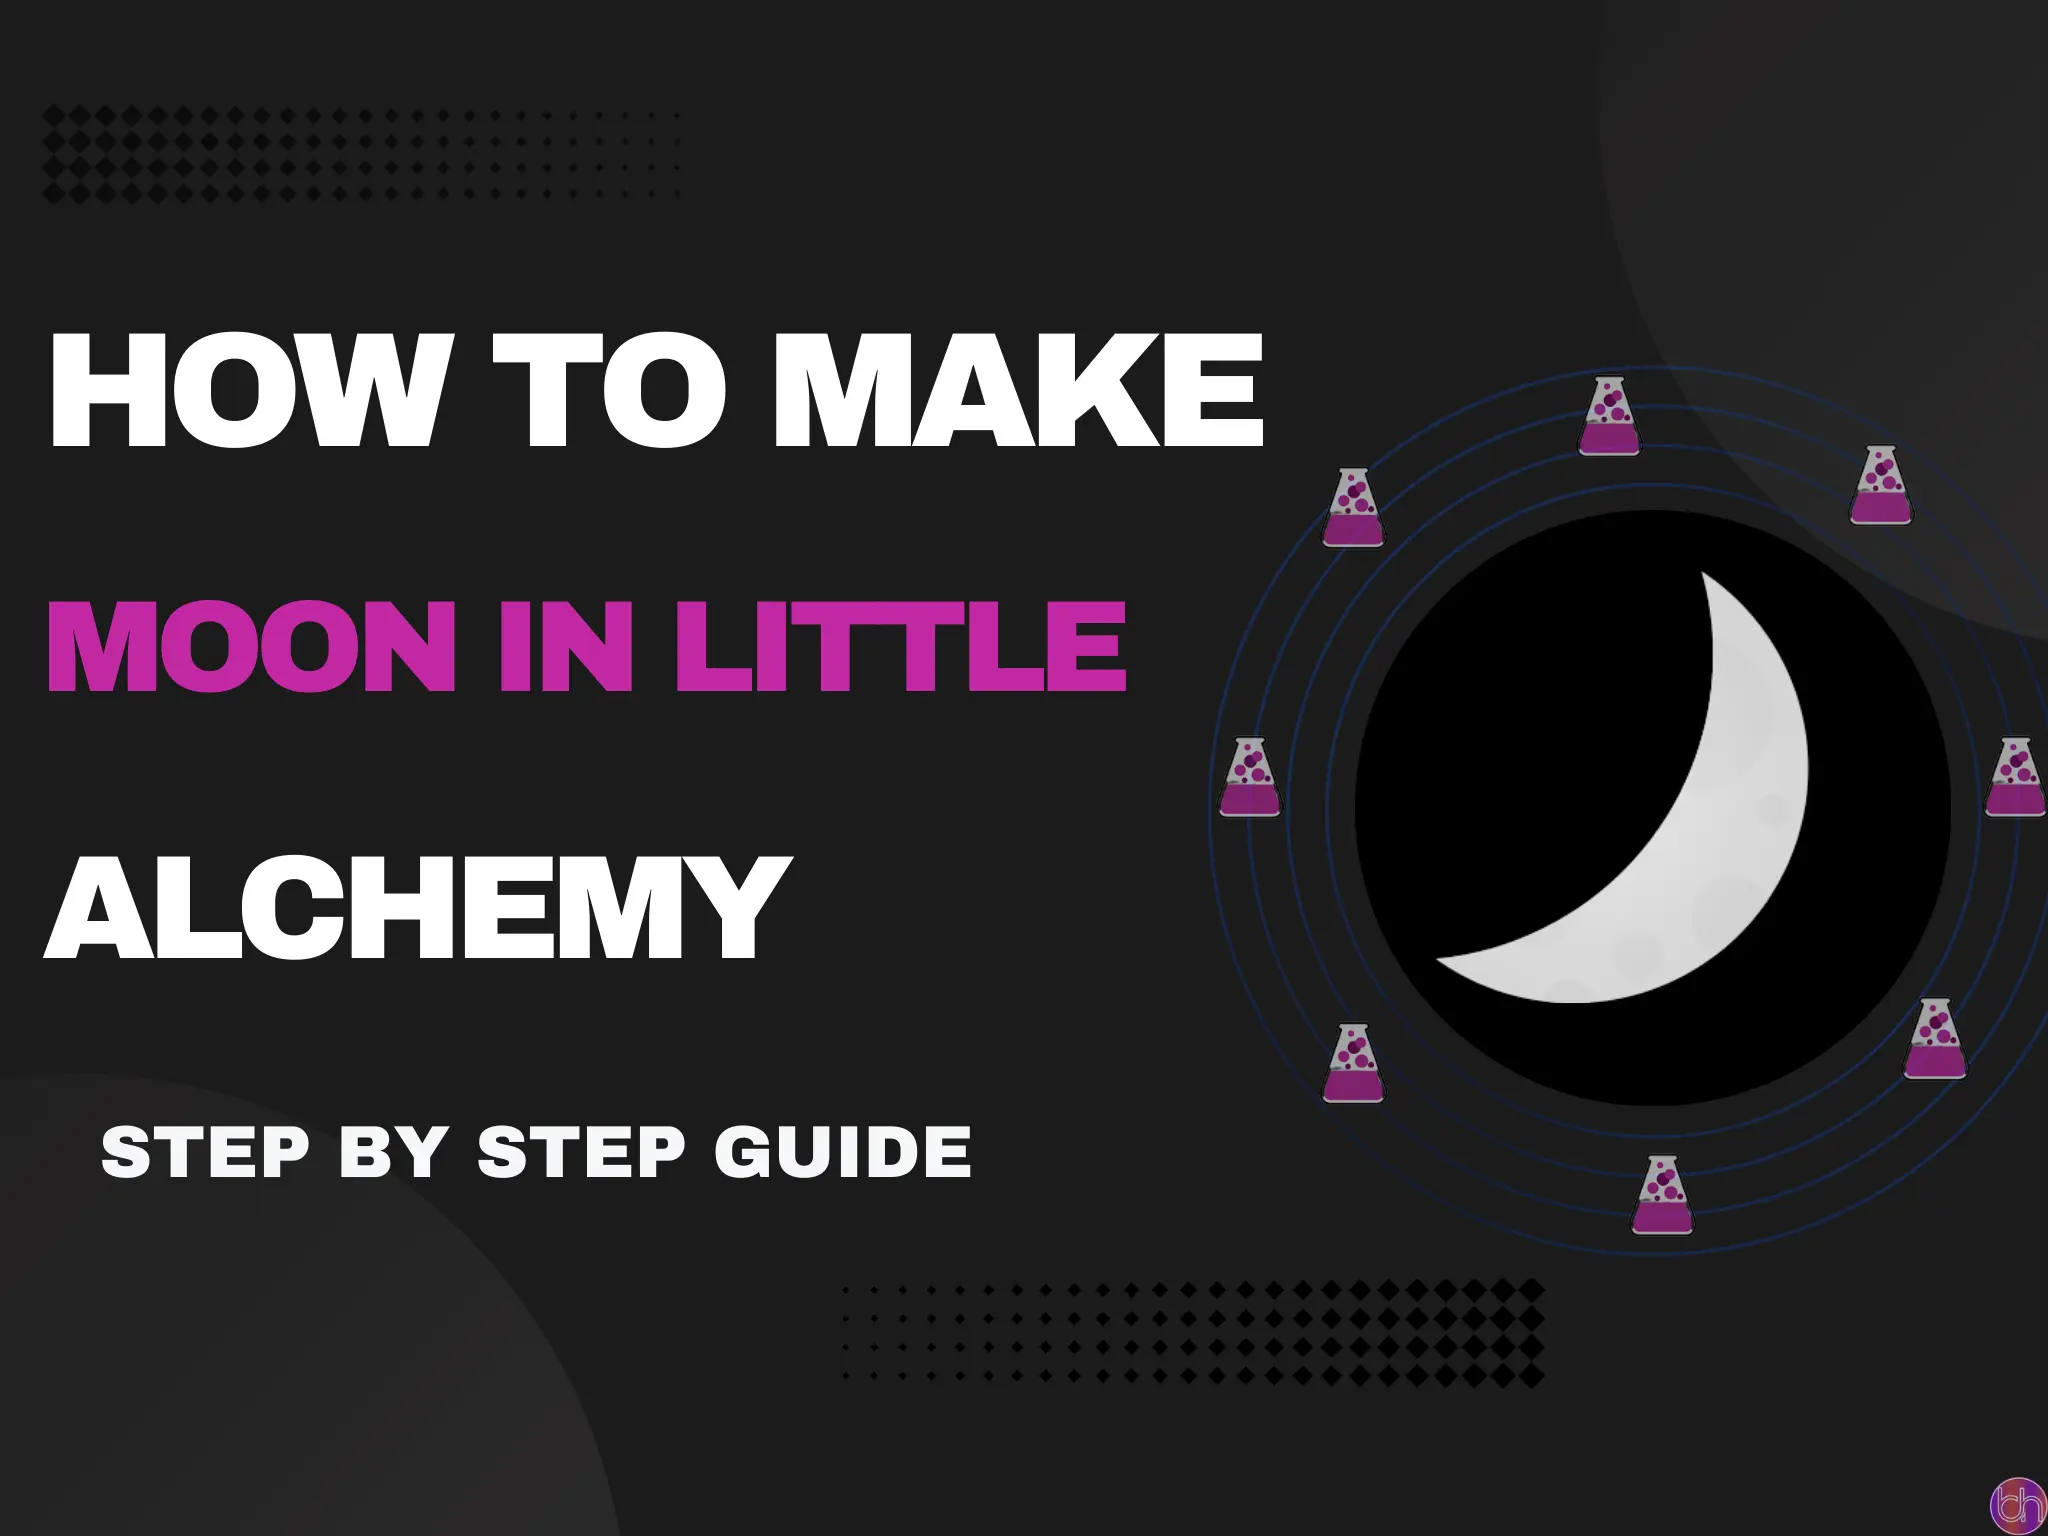 How to make Moon in little alchemy